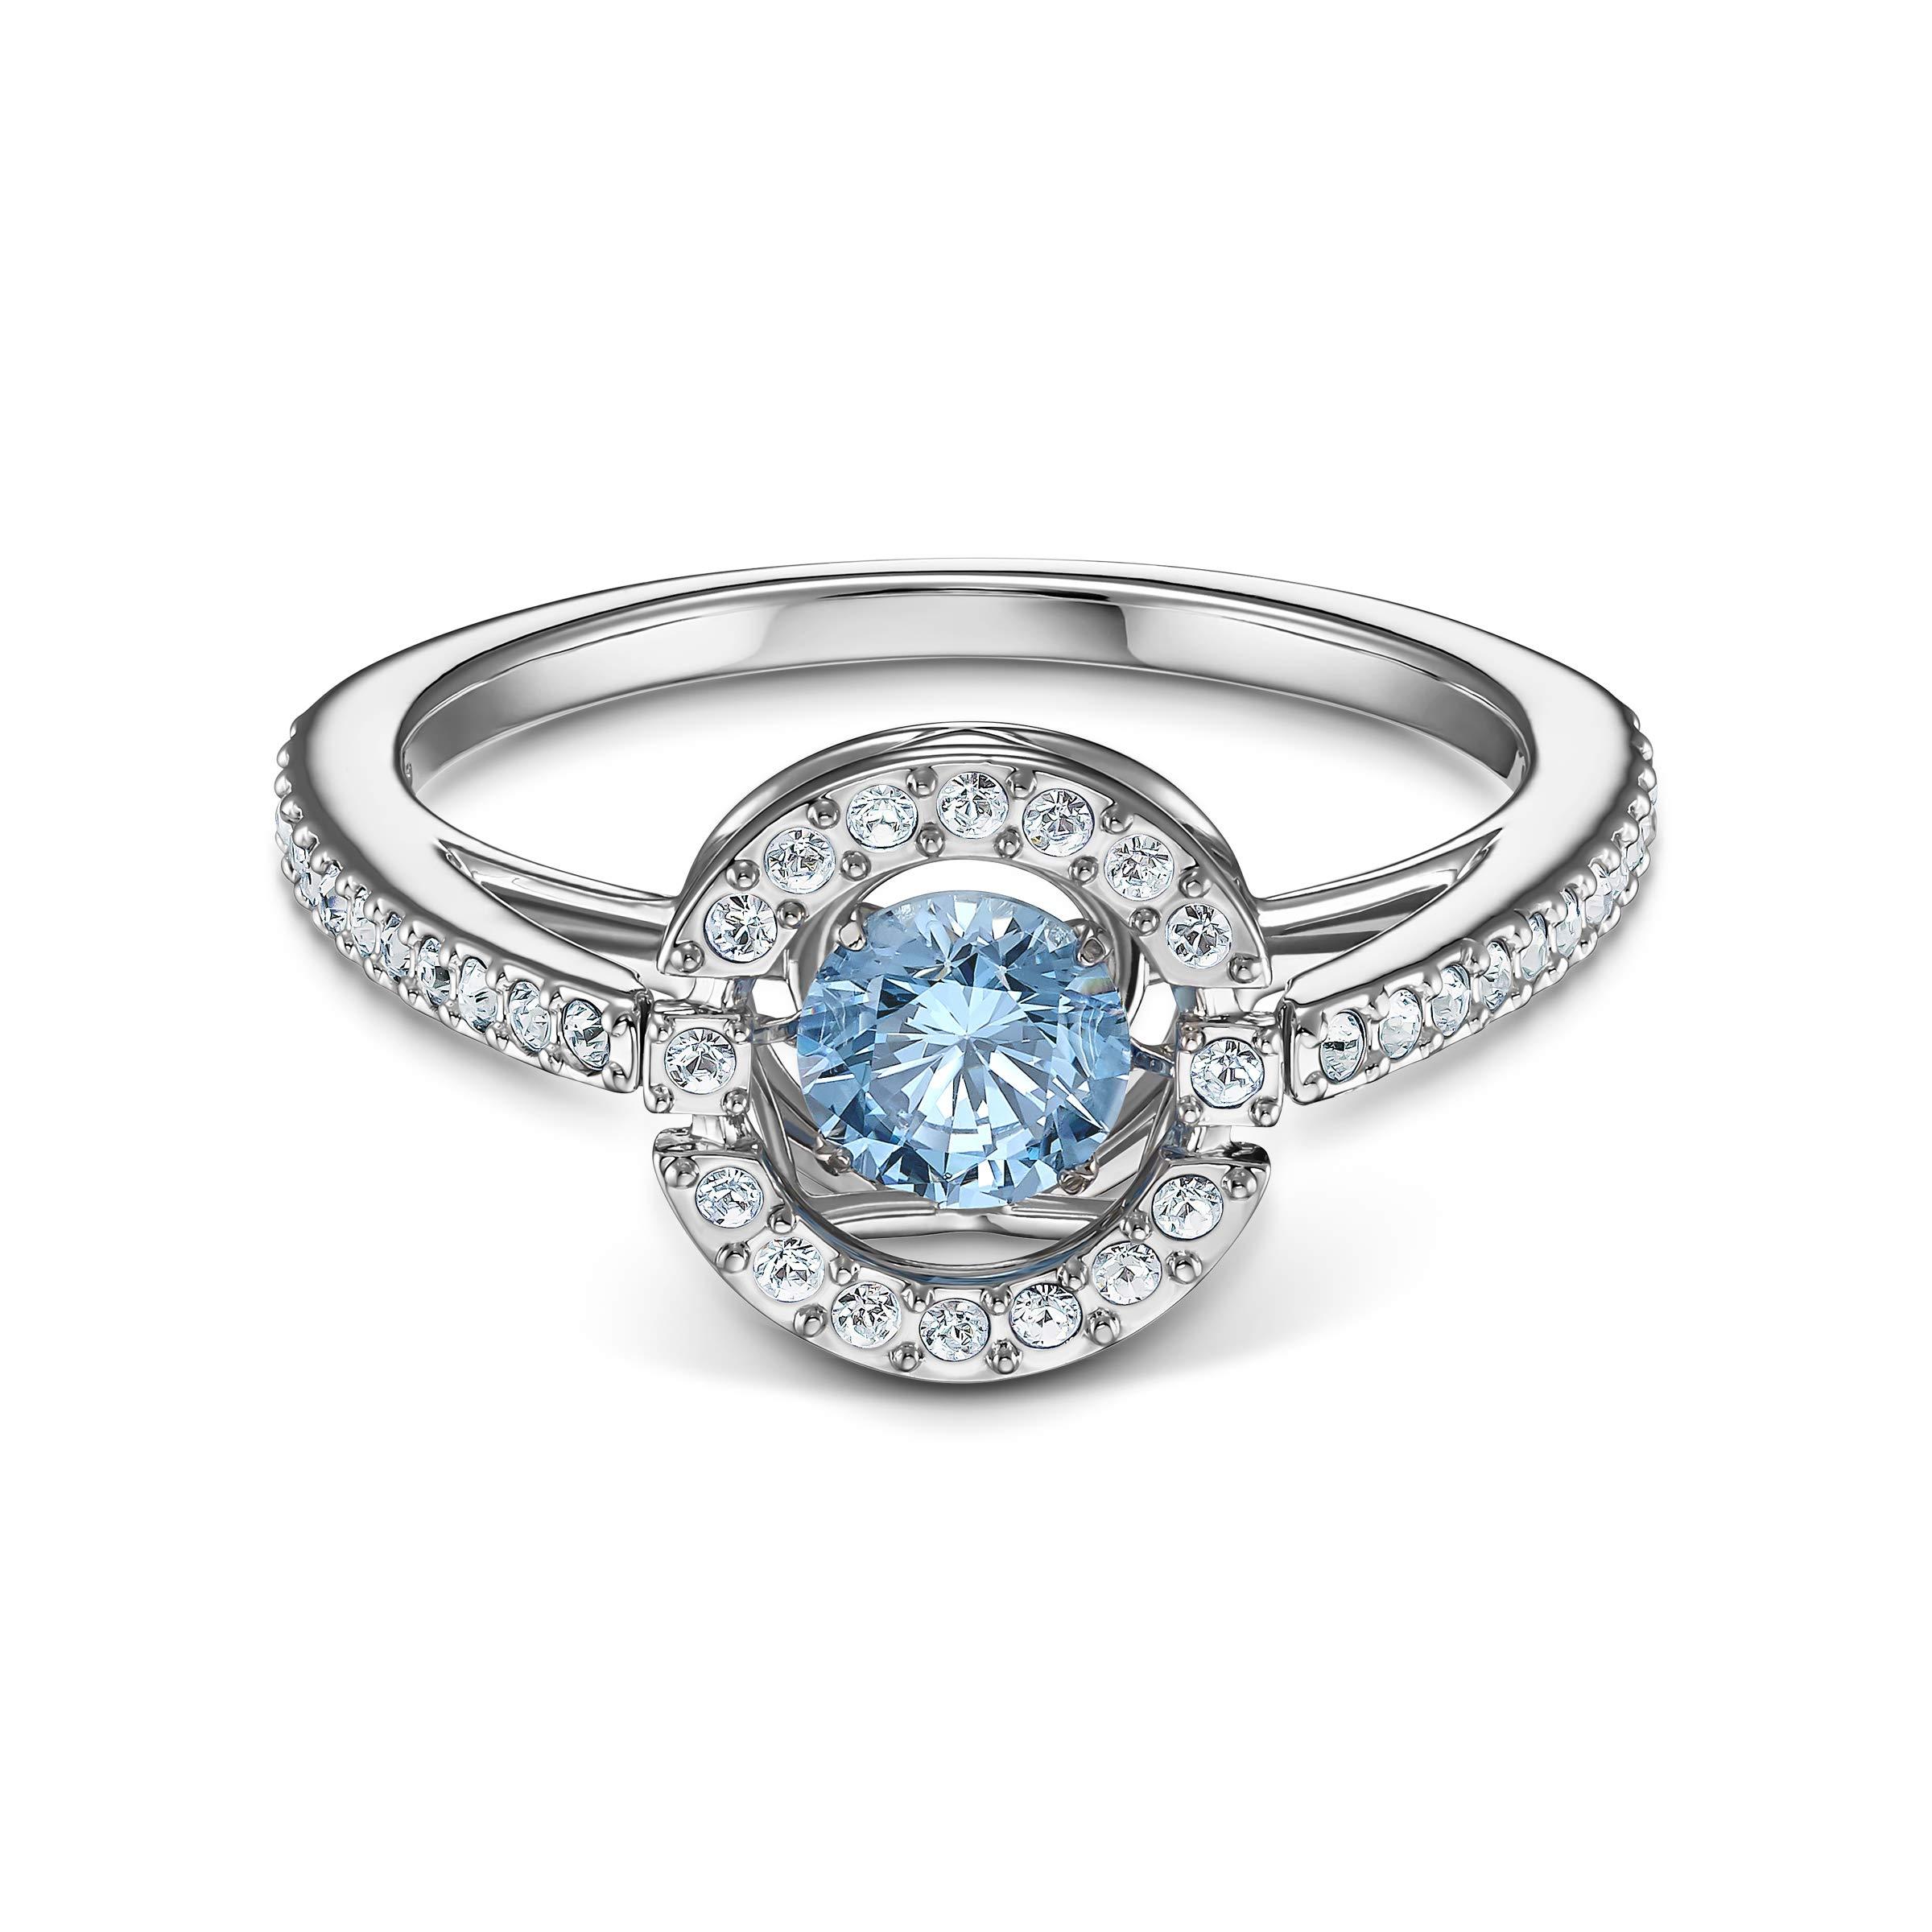 Swarovski 125 Anniversary Sparkling Dance Round Ring With White And Blue  Crystals In A Rhodium Plated Setting | Lyst